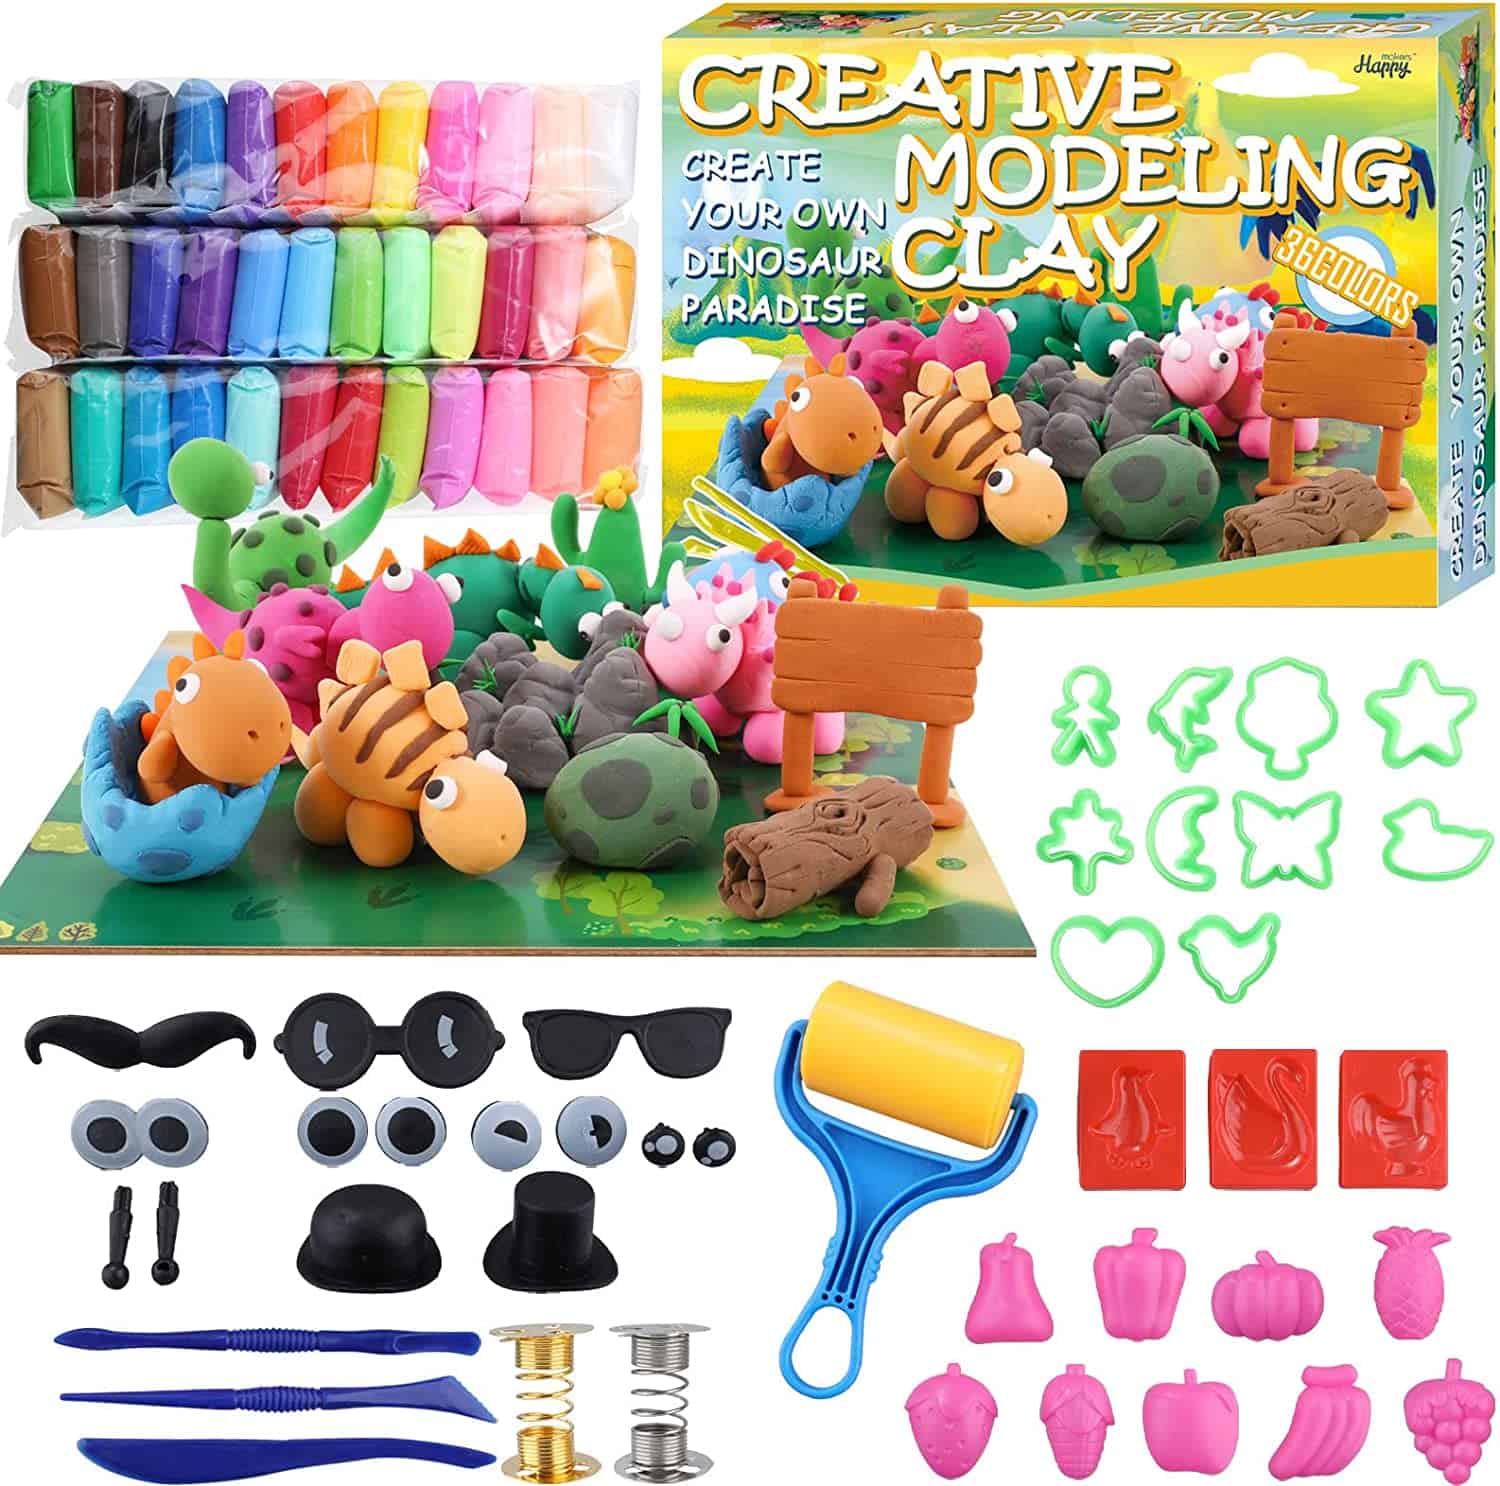 Best claymation clay set for kids- Happy Makers Modeling Clay Kit